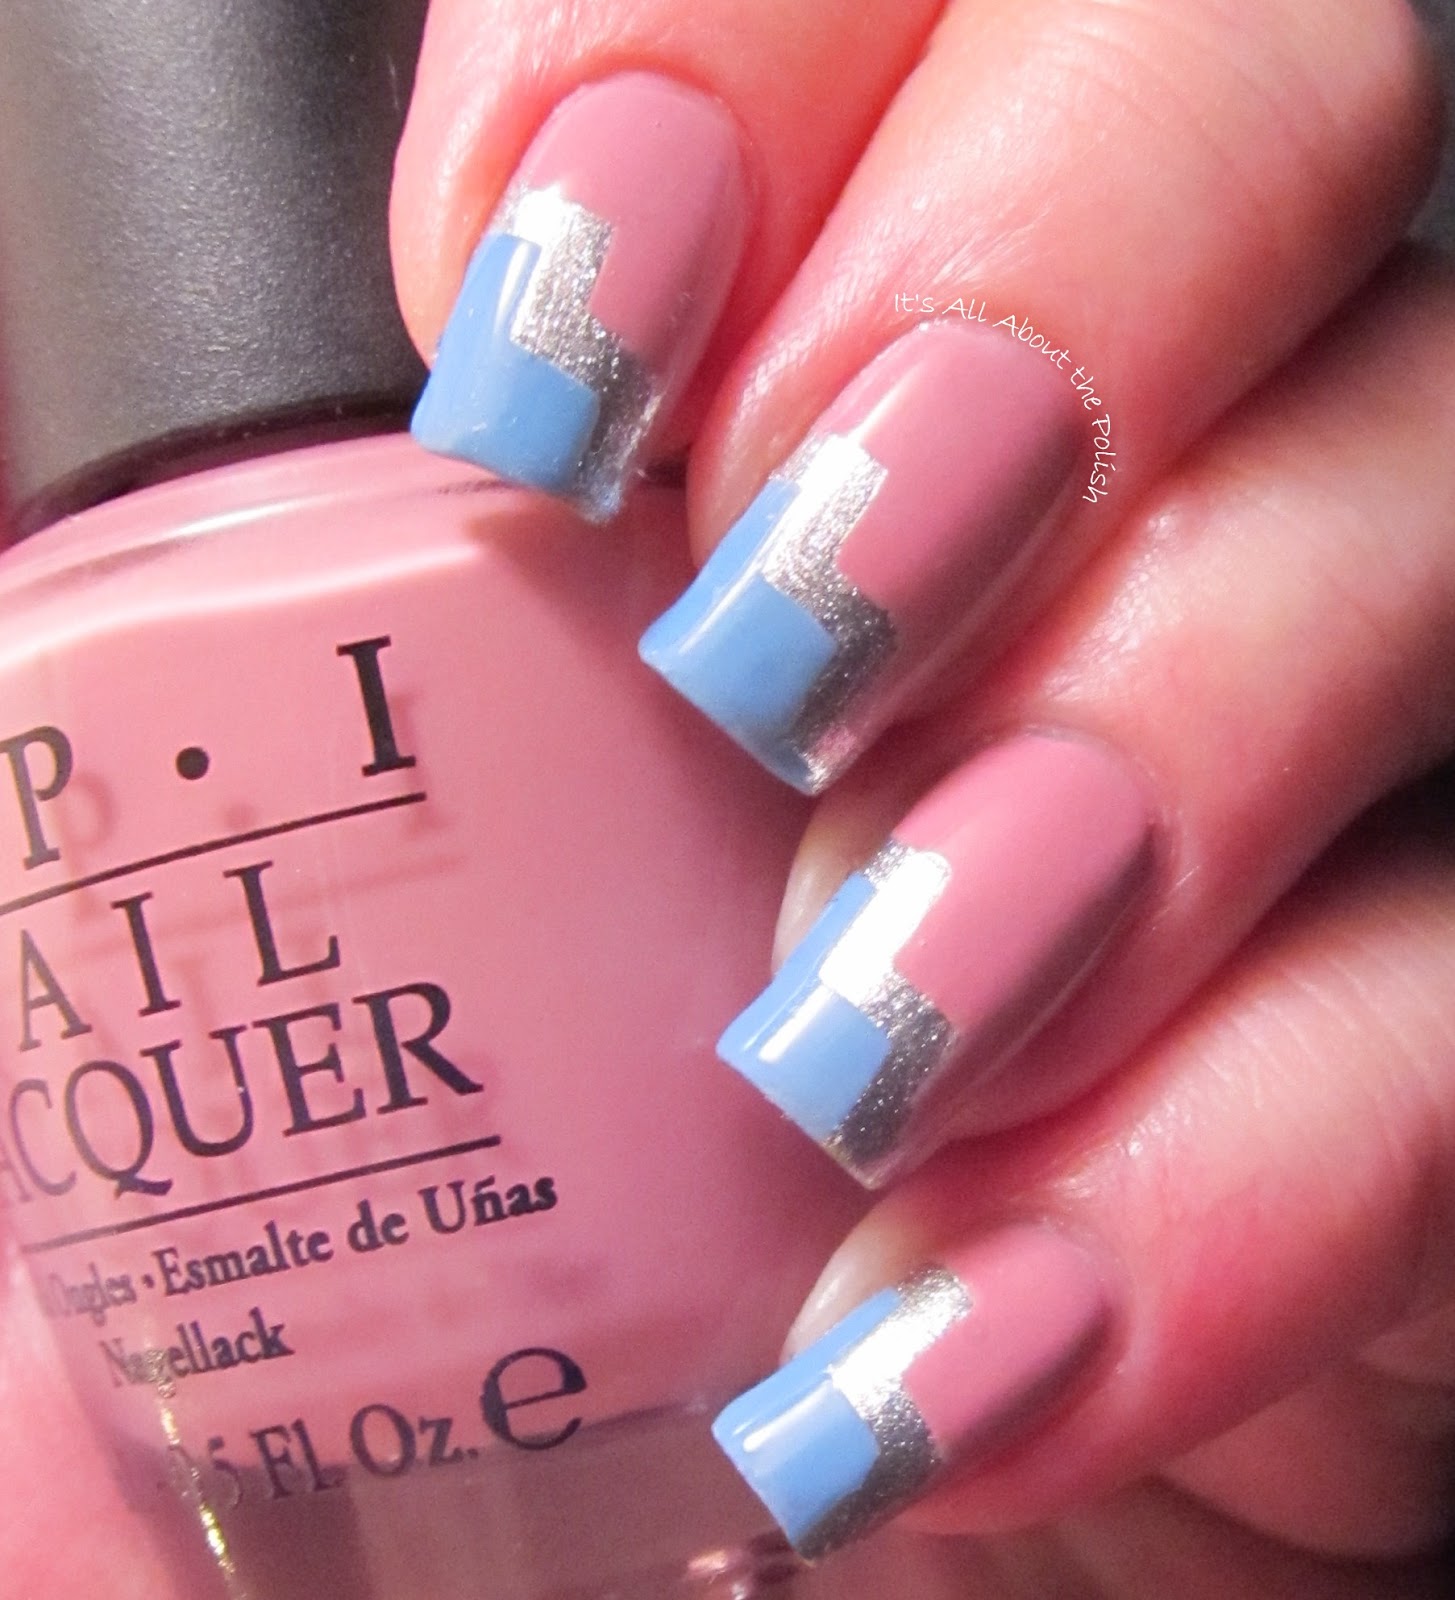 It's all about the polish: Wave of Polish tape mani